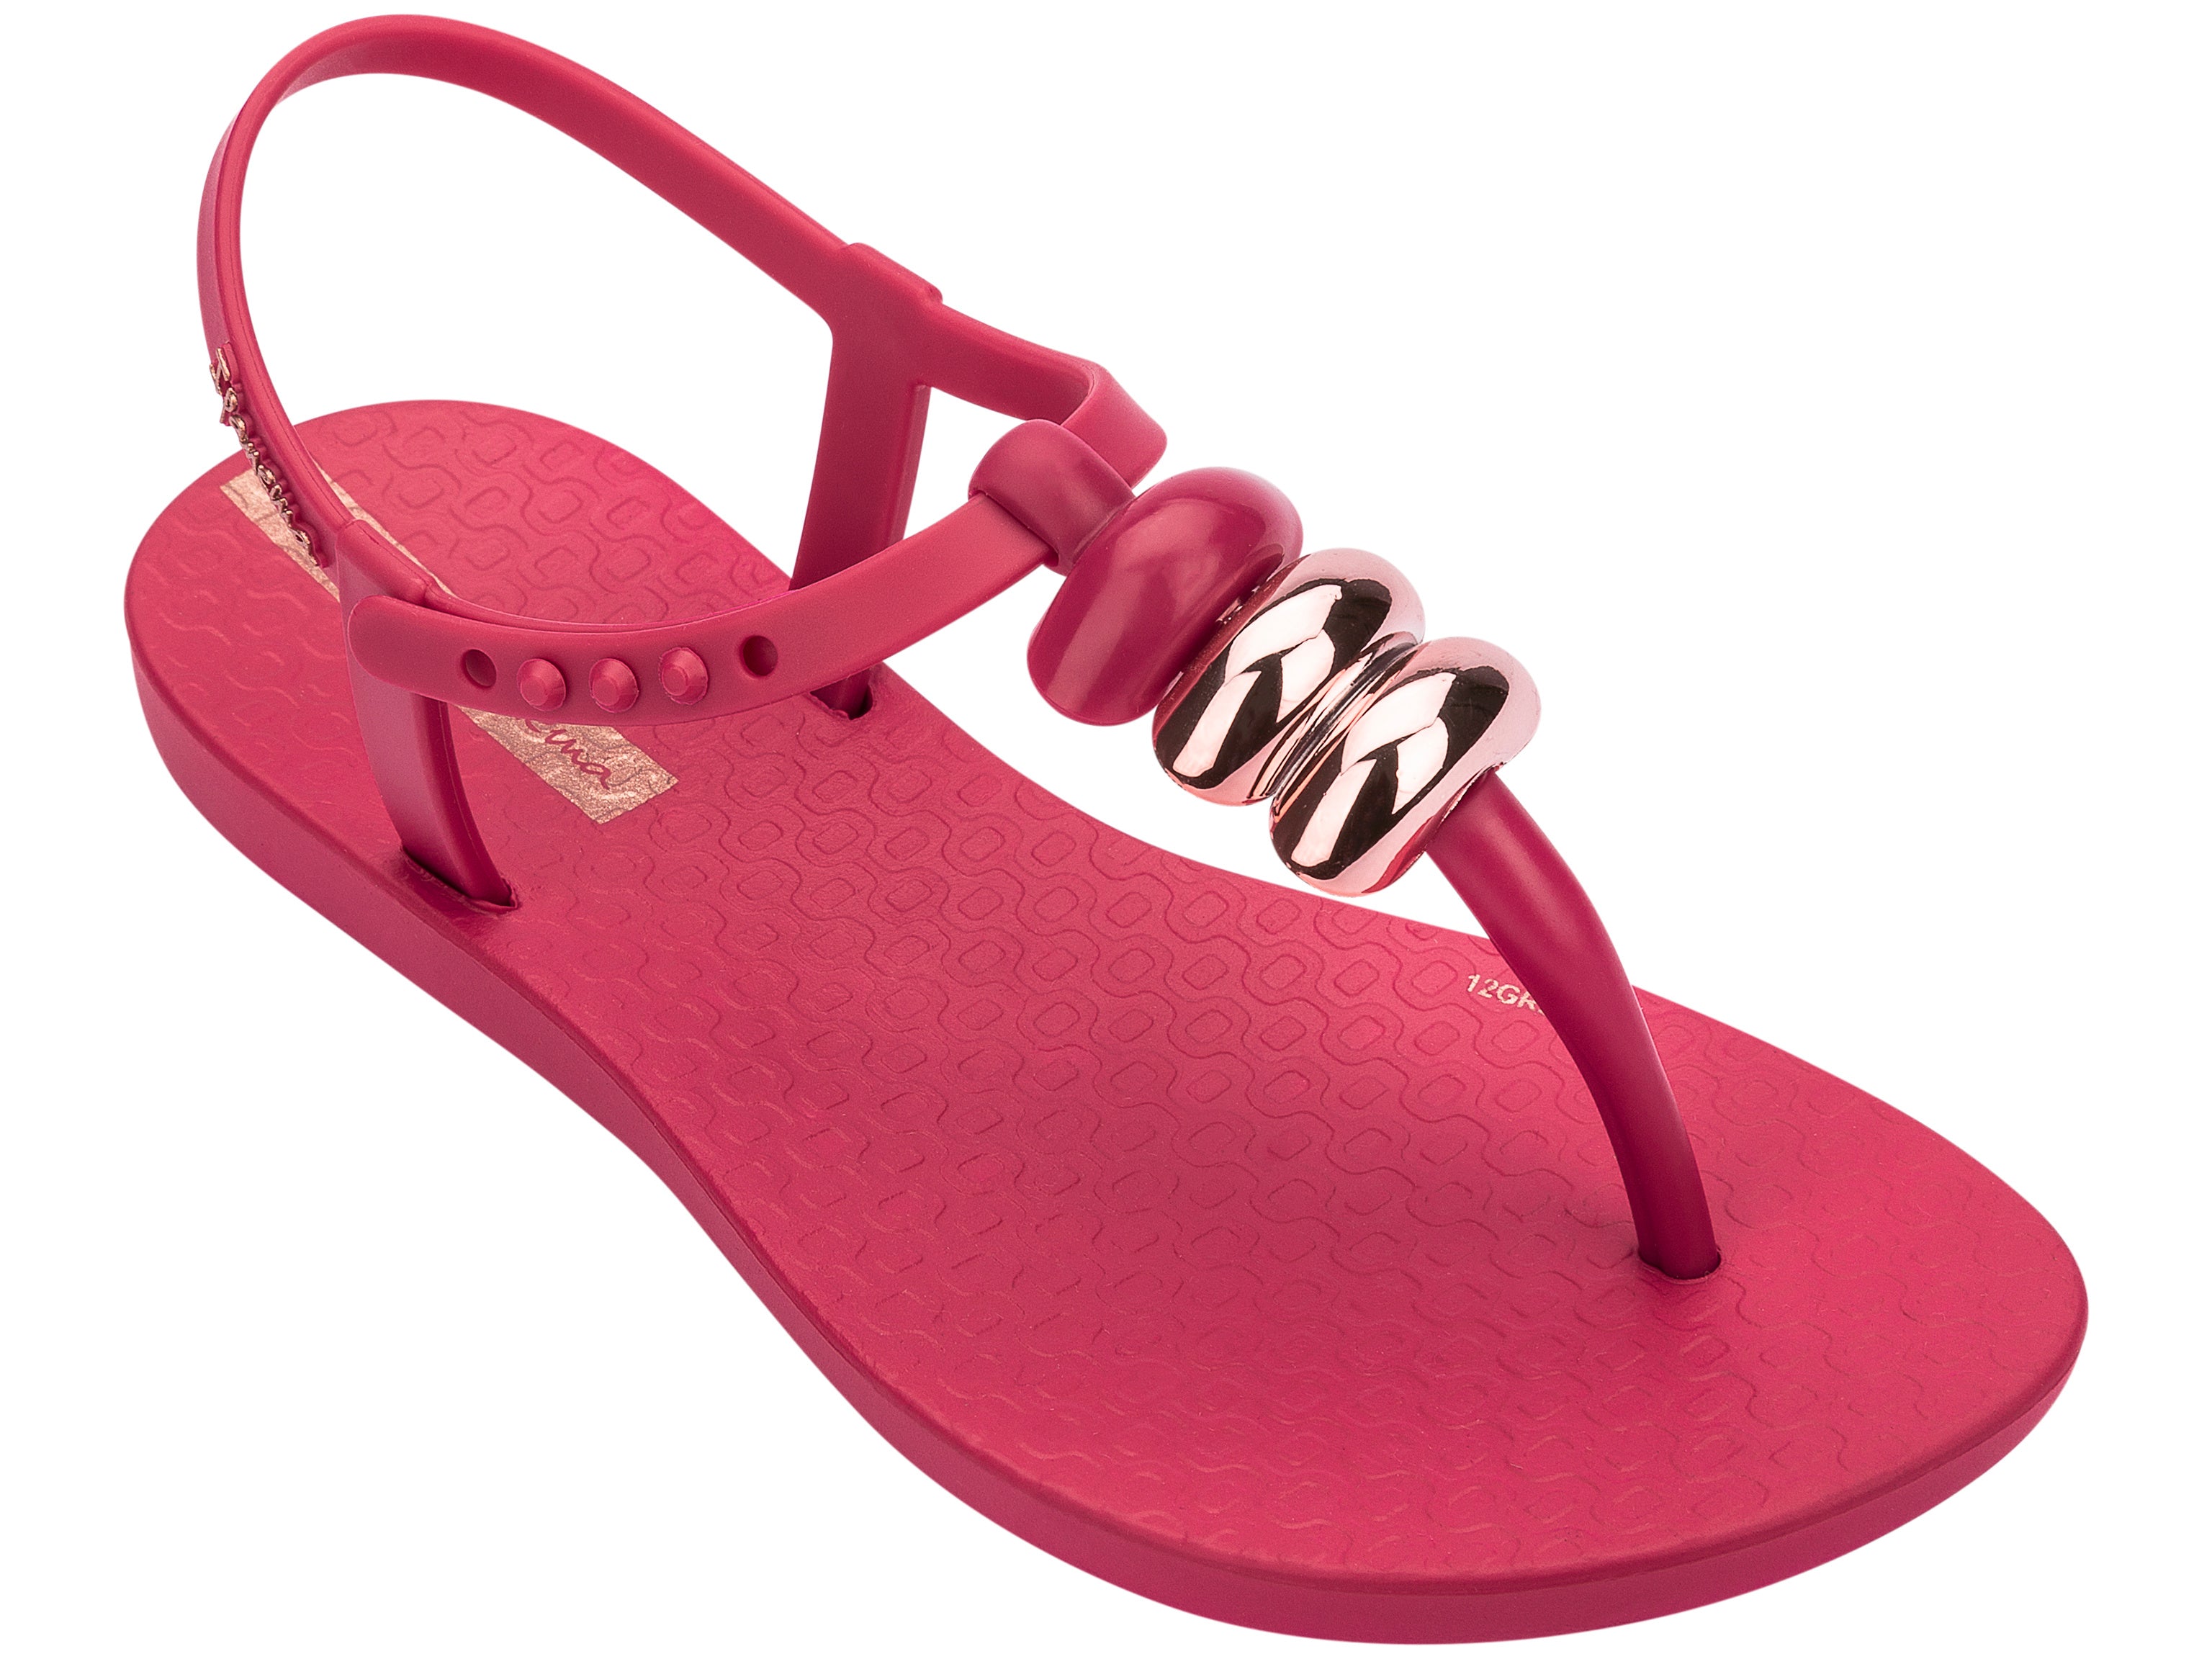 Angled view of a pink Ipanema Class kids' t-strap sandal with 3 baubles on the strap.